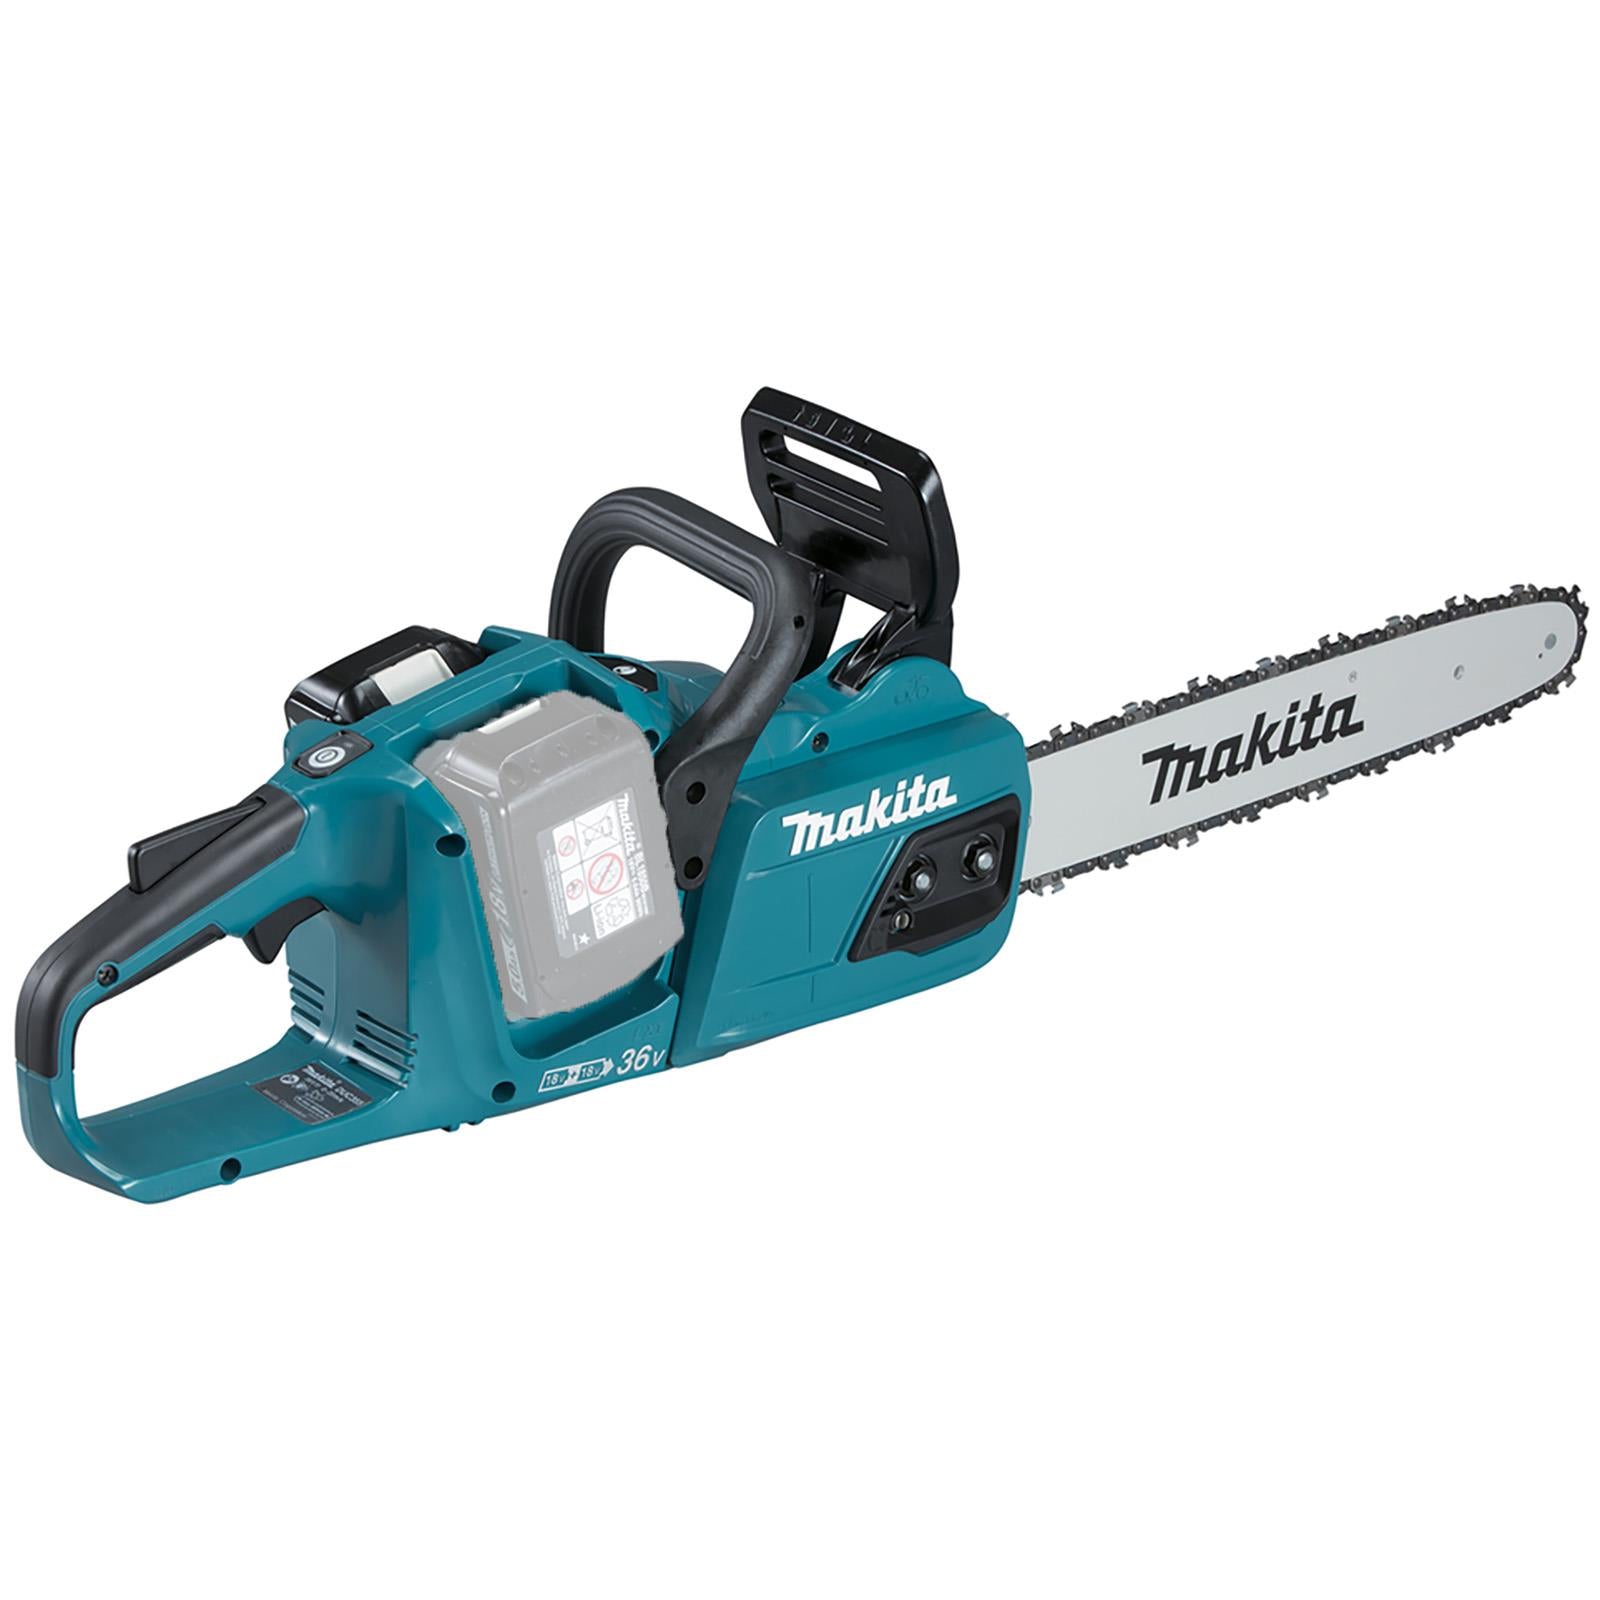 Makita Chainsaw Heavy Duty 35cm 14" 18V x 2 LXT Brushless Cordless Garden Tree Cutting Pruning Bare Unit Body Only DUC355Z